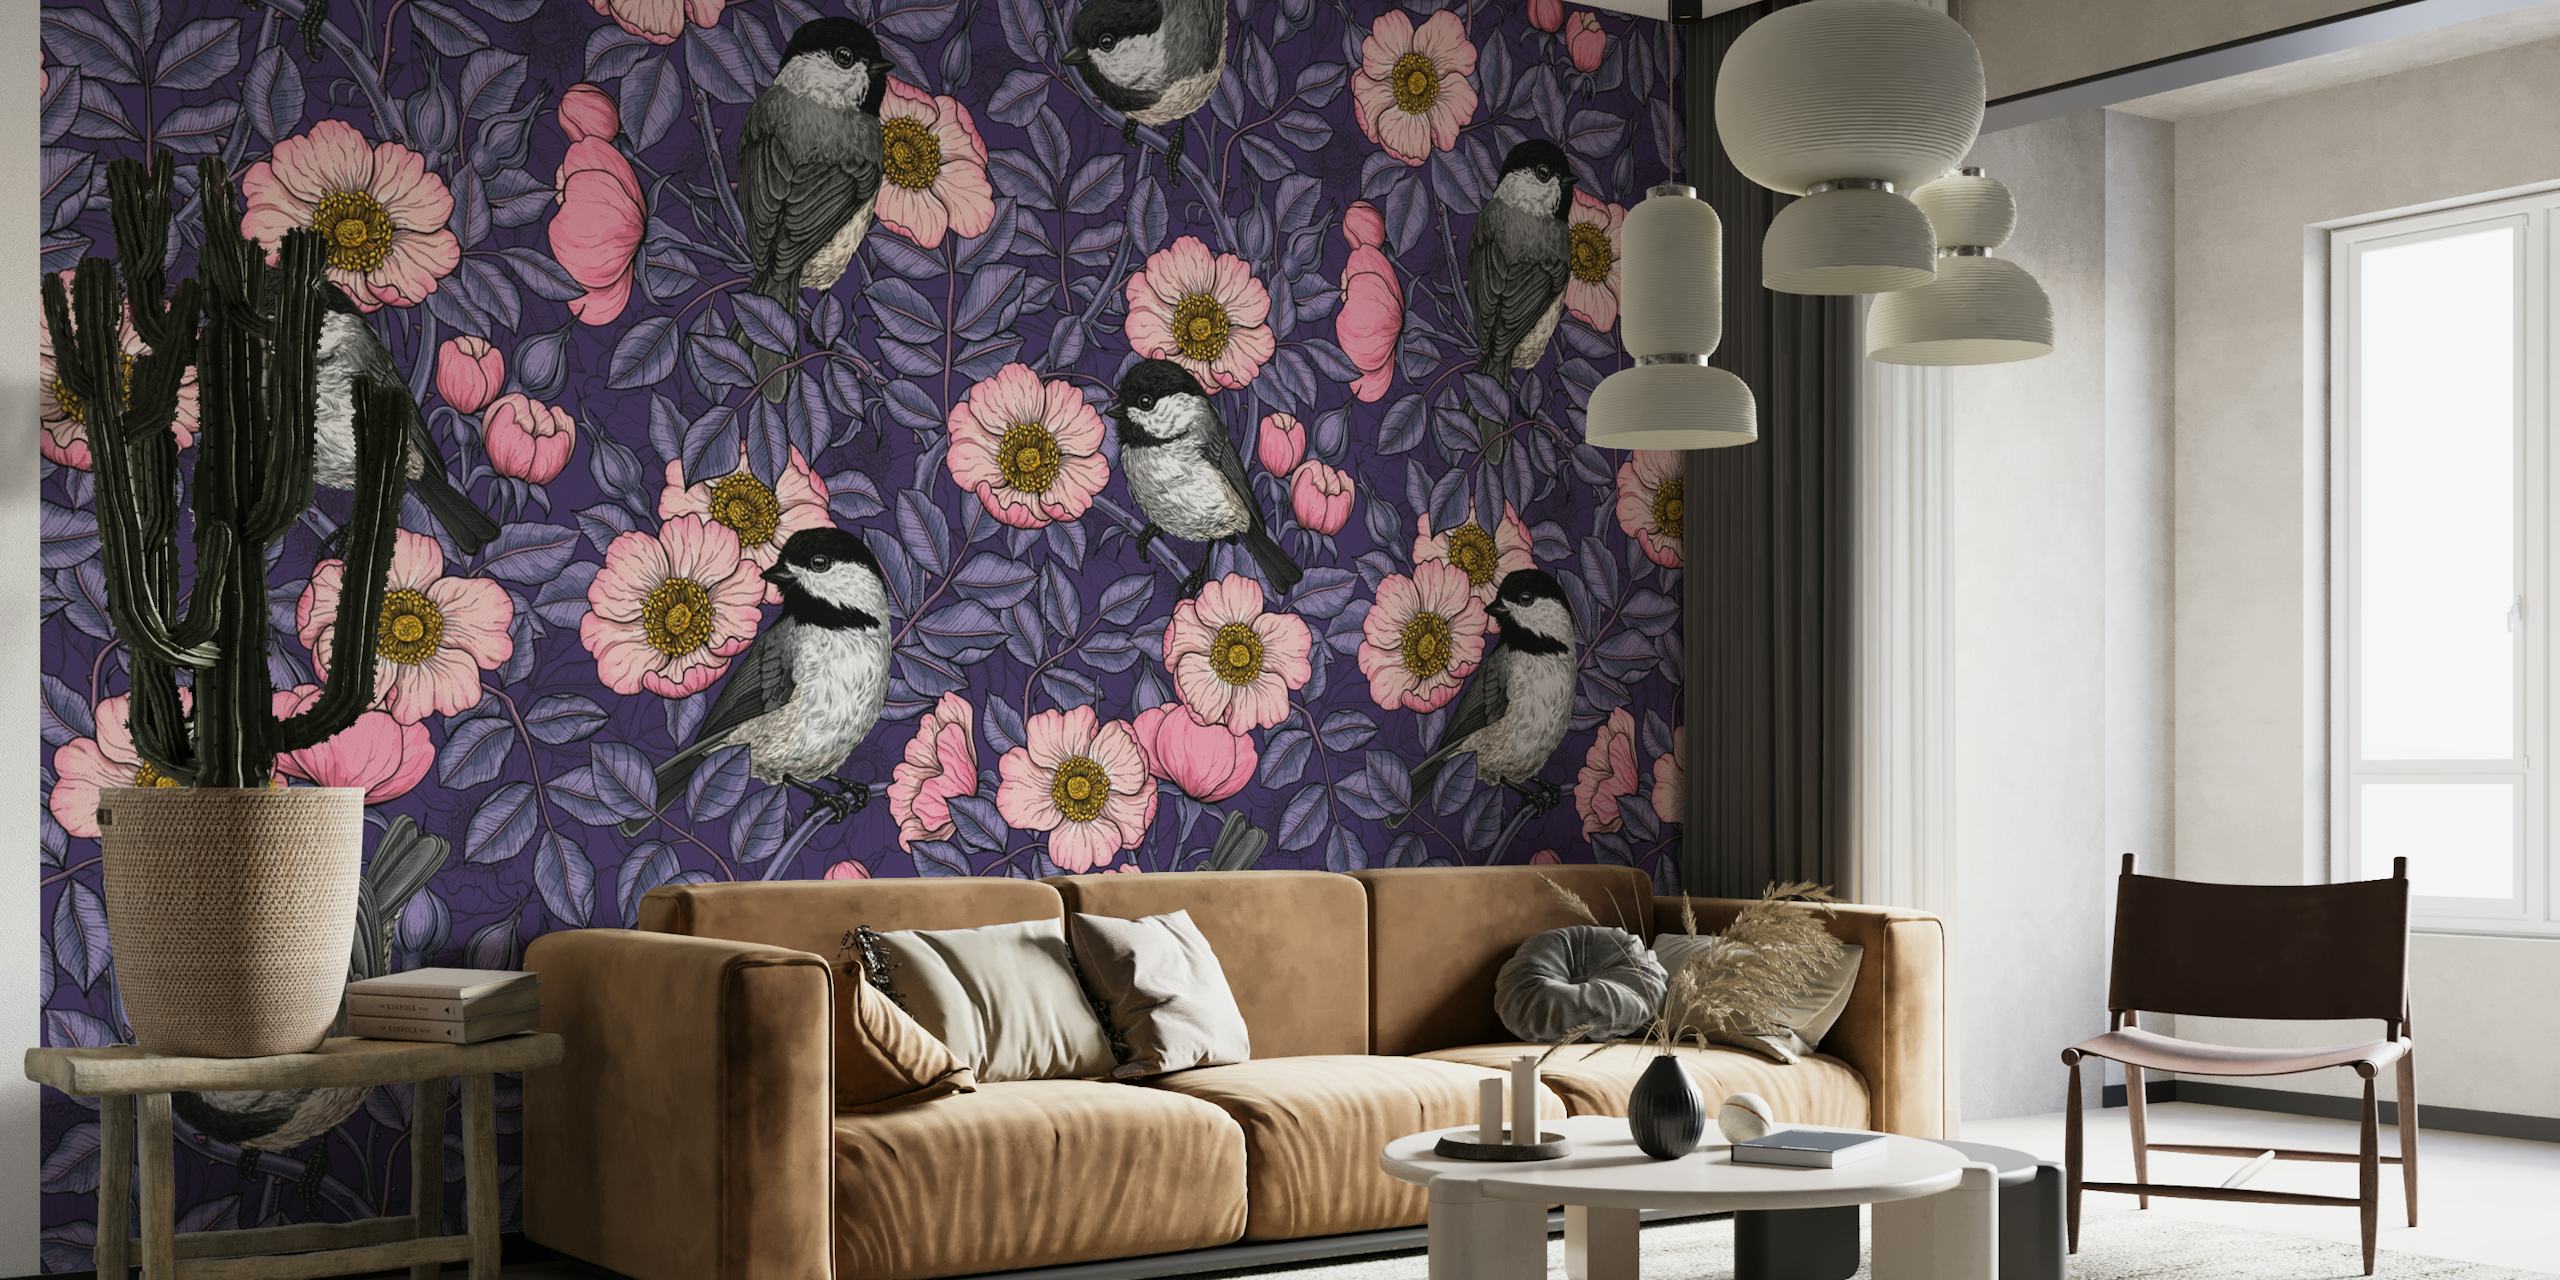 Charming birds amidst blooming wild roses on a wallpaper mural.